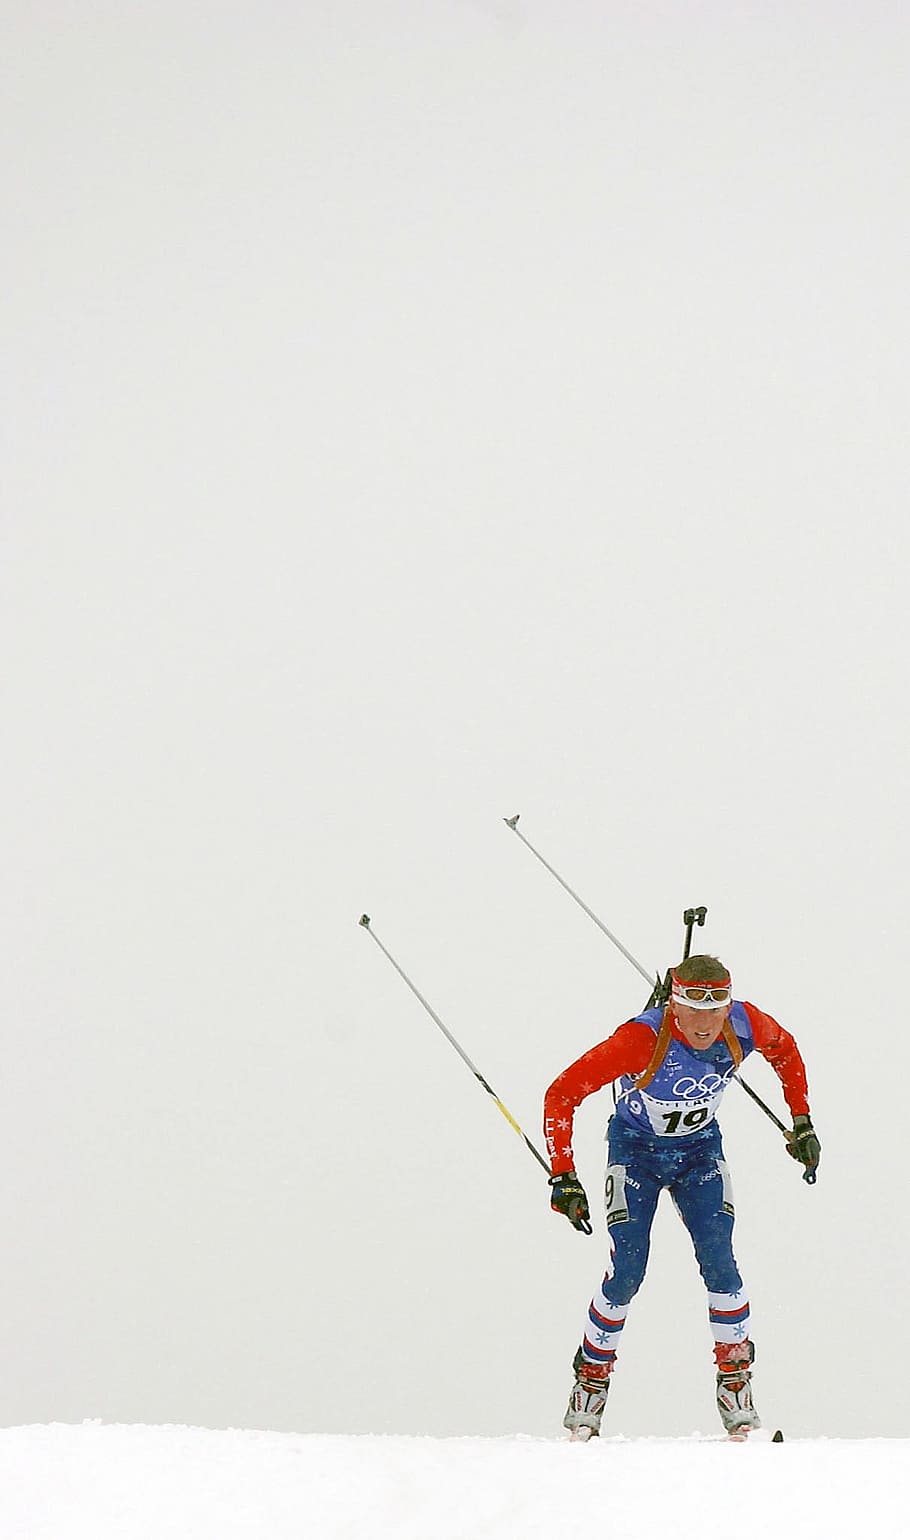 skier, cross country, snow, winter, male, competition, biathalon, ski, skiing, speed